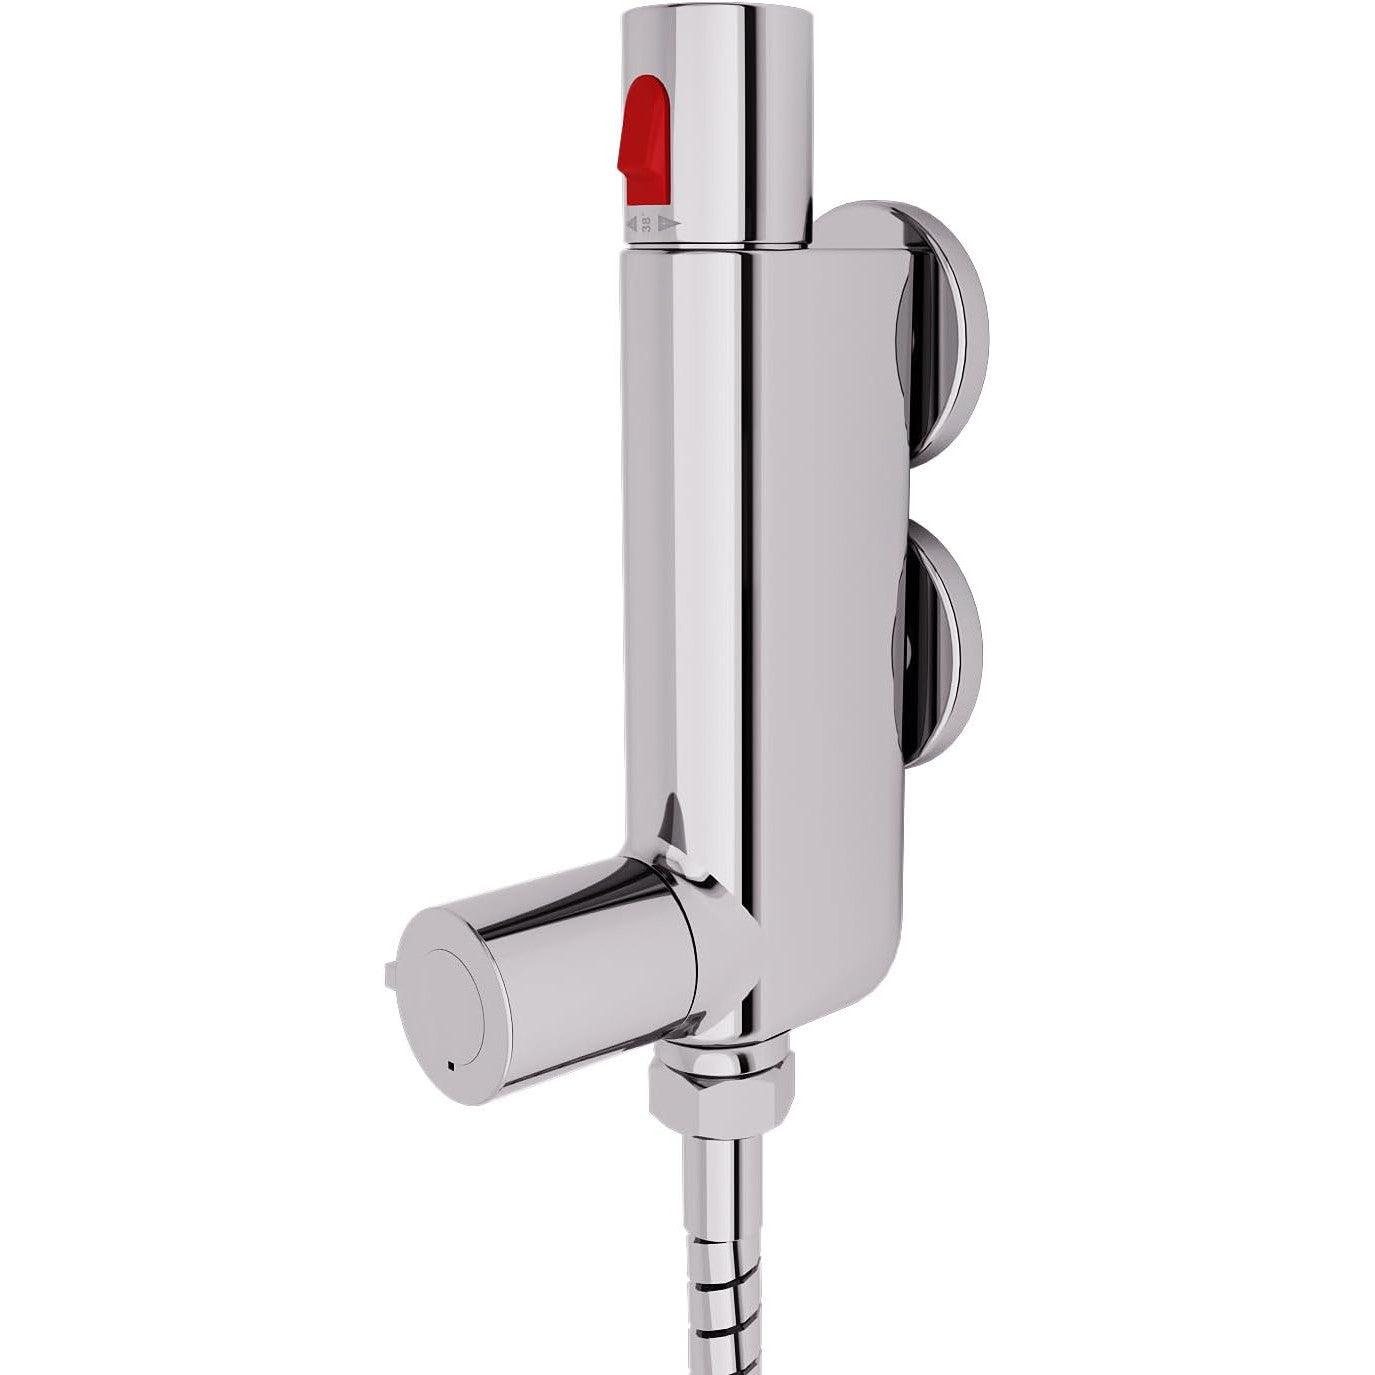 Nes Home Modern Chrome Thermostatic Bar Mixer Shower Valve, 1/2in Top Outlet - Massive Discounts